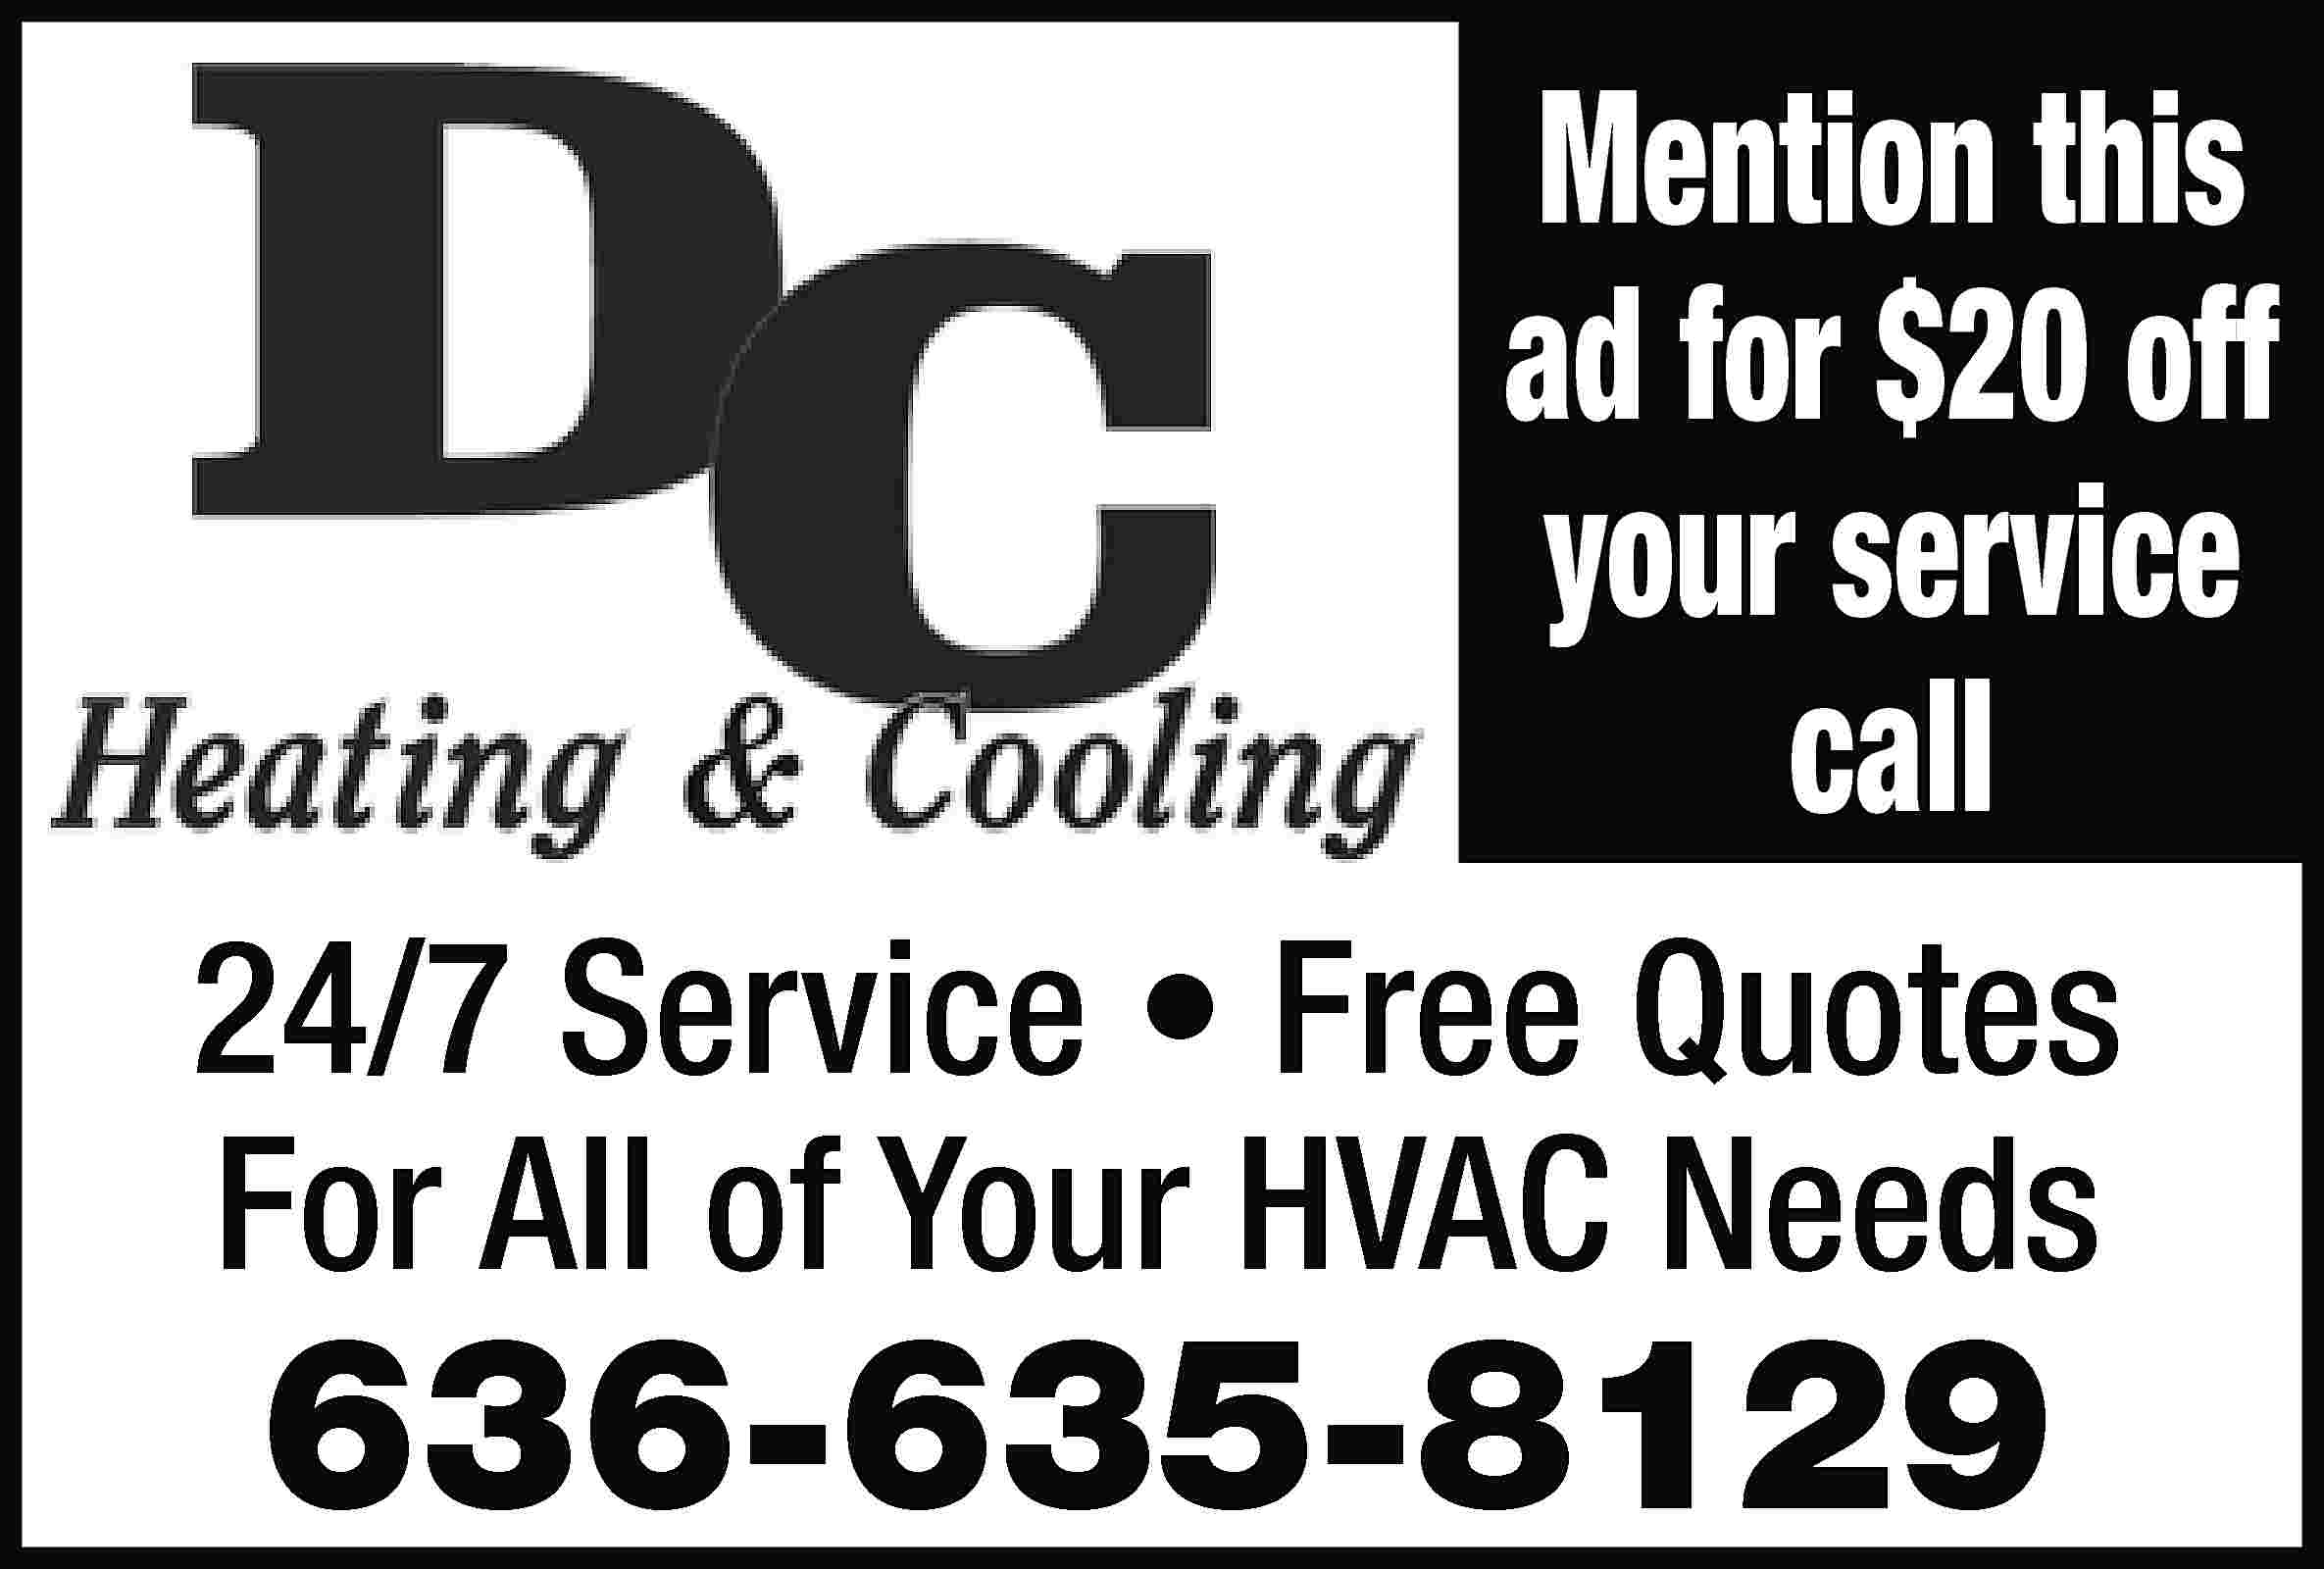 Mention this ad for $20  Mention this ad for $20 off your service call 24/7 Service • Free Quotes For All of Your HVAC Needs 636-635-8129